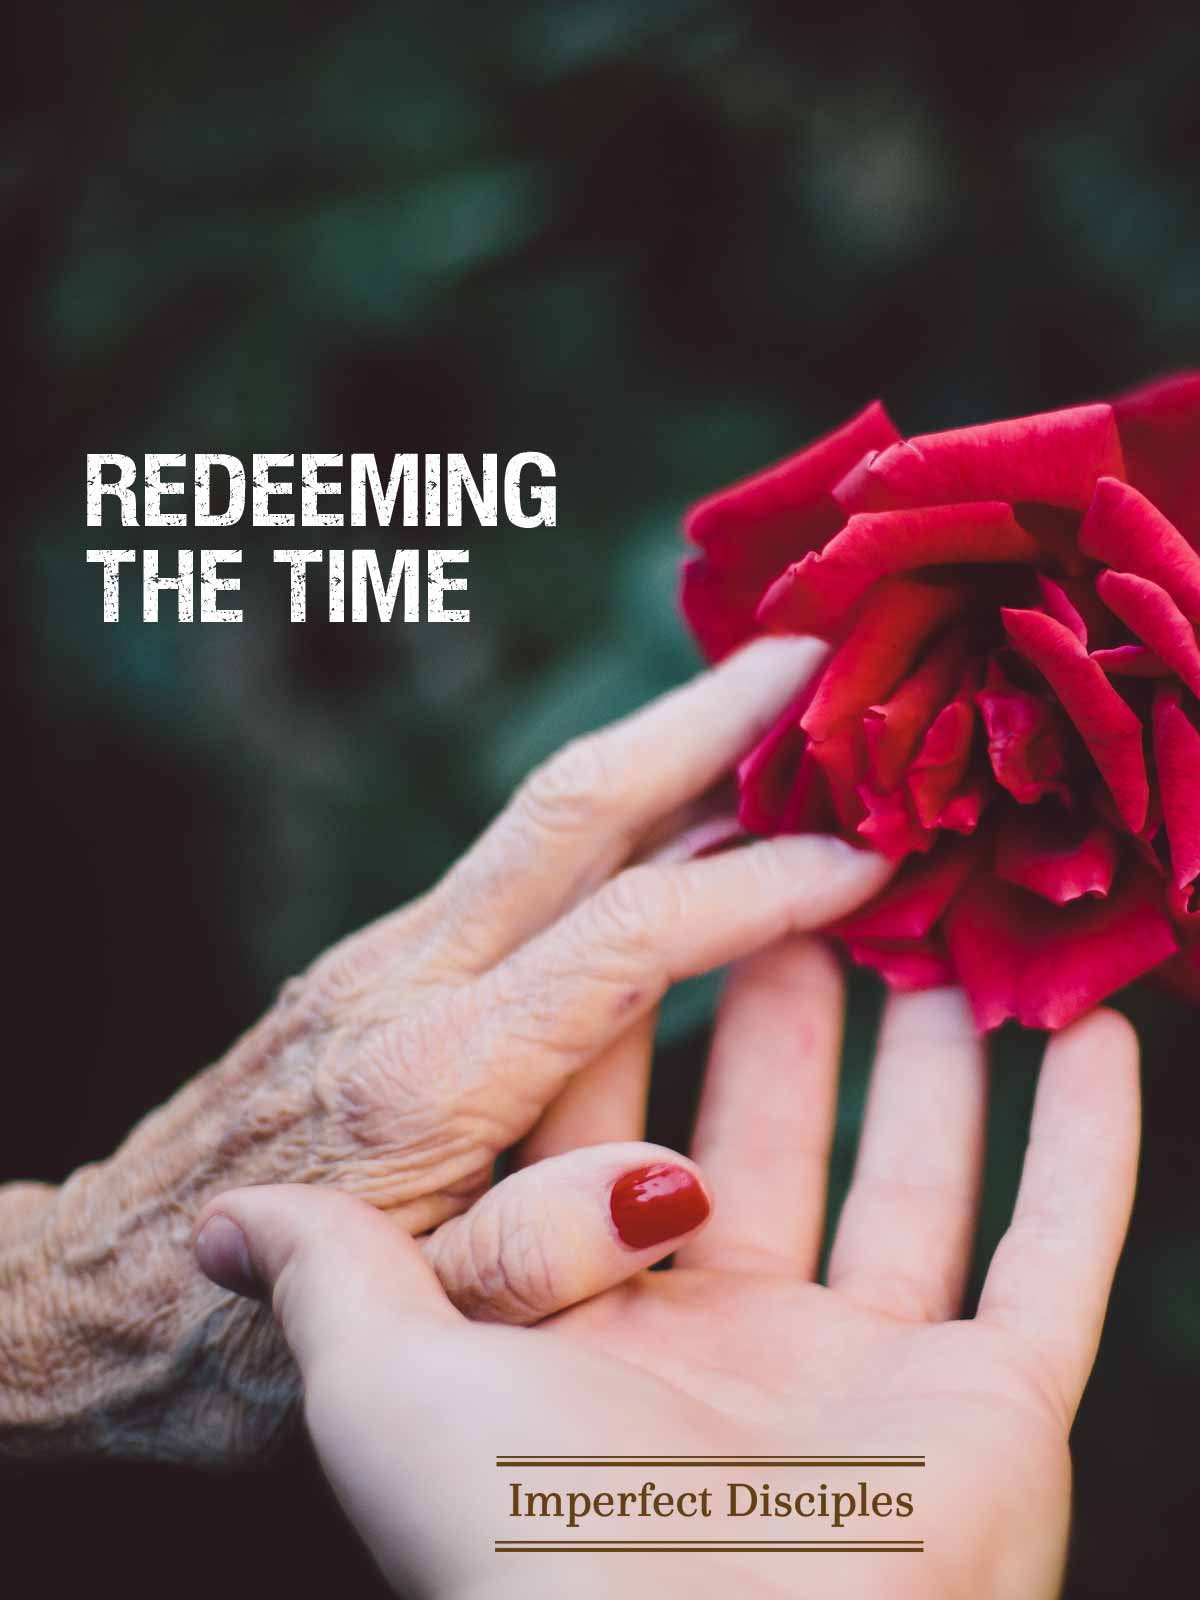 Redeeming the Time